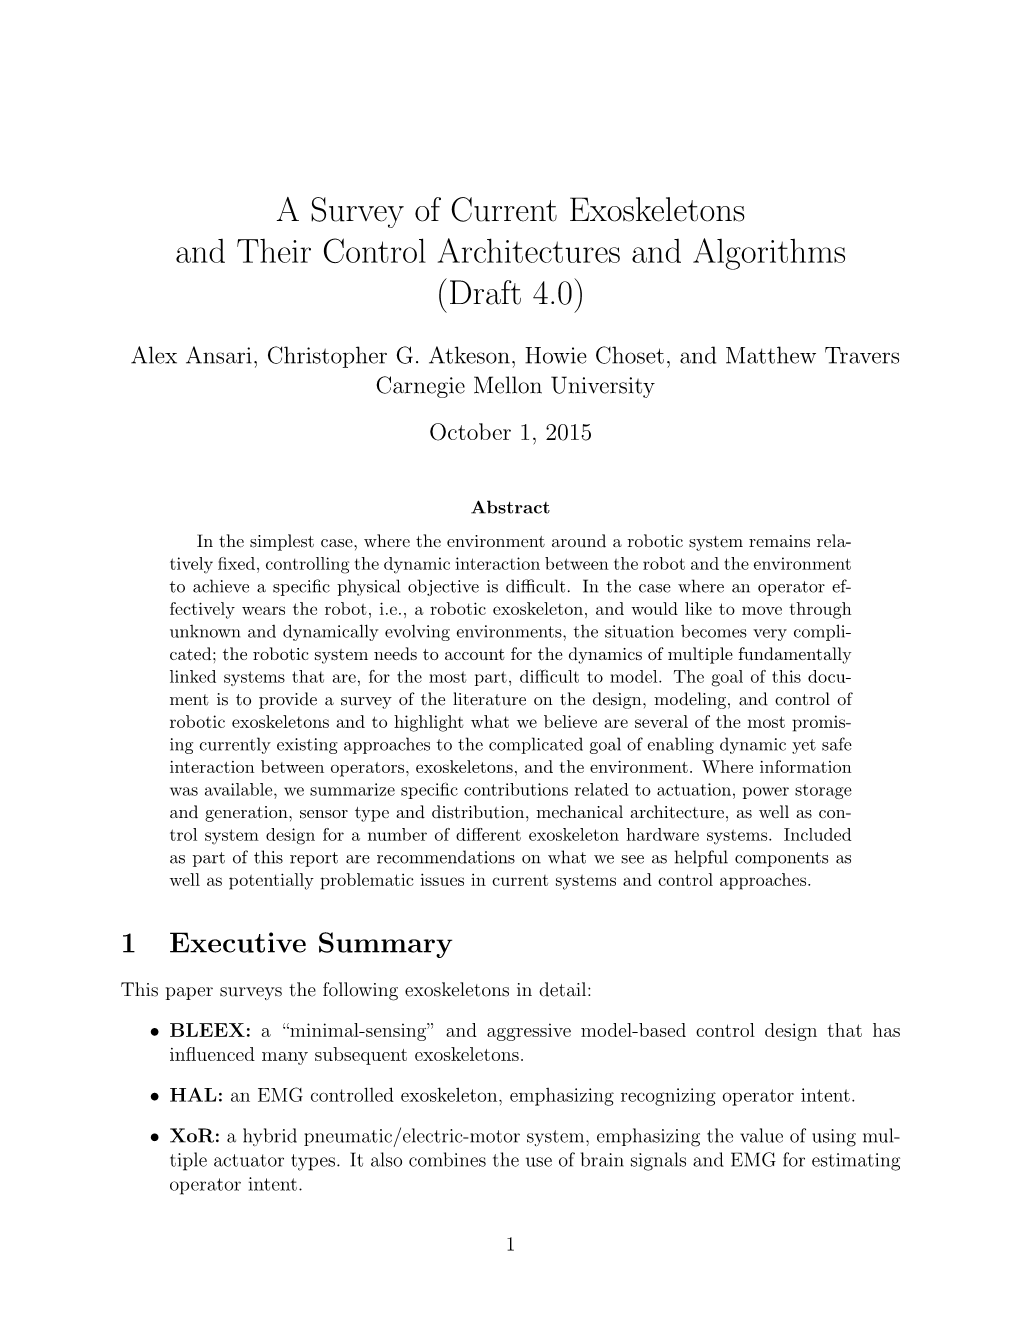 A Survey of Current Exoskeletons and Their Control Architectures and Algorithms (Draft 4.0)